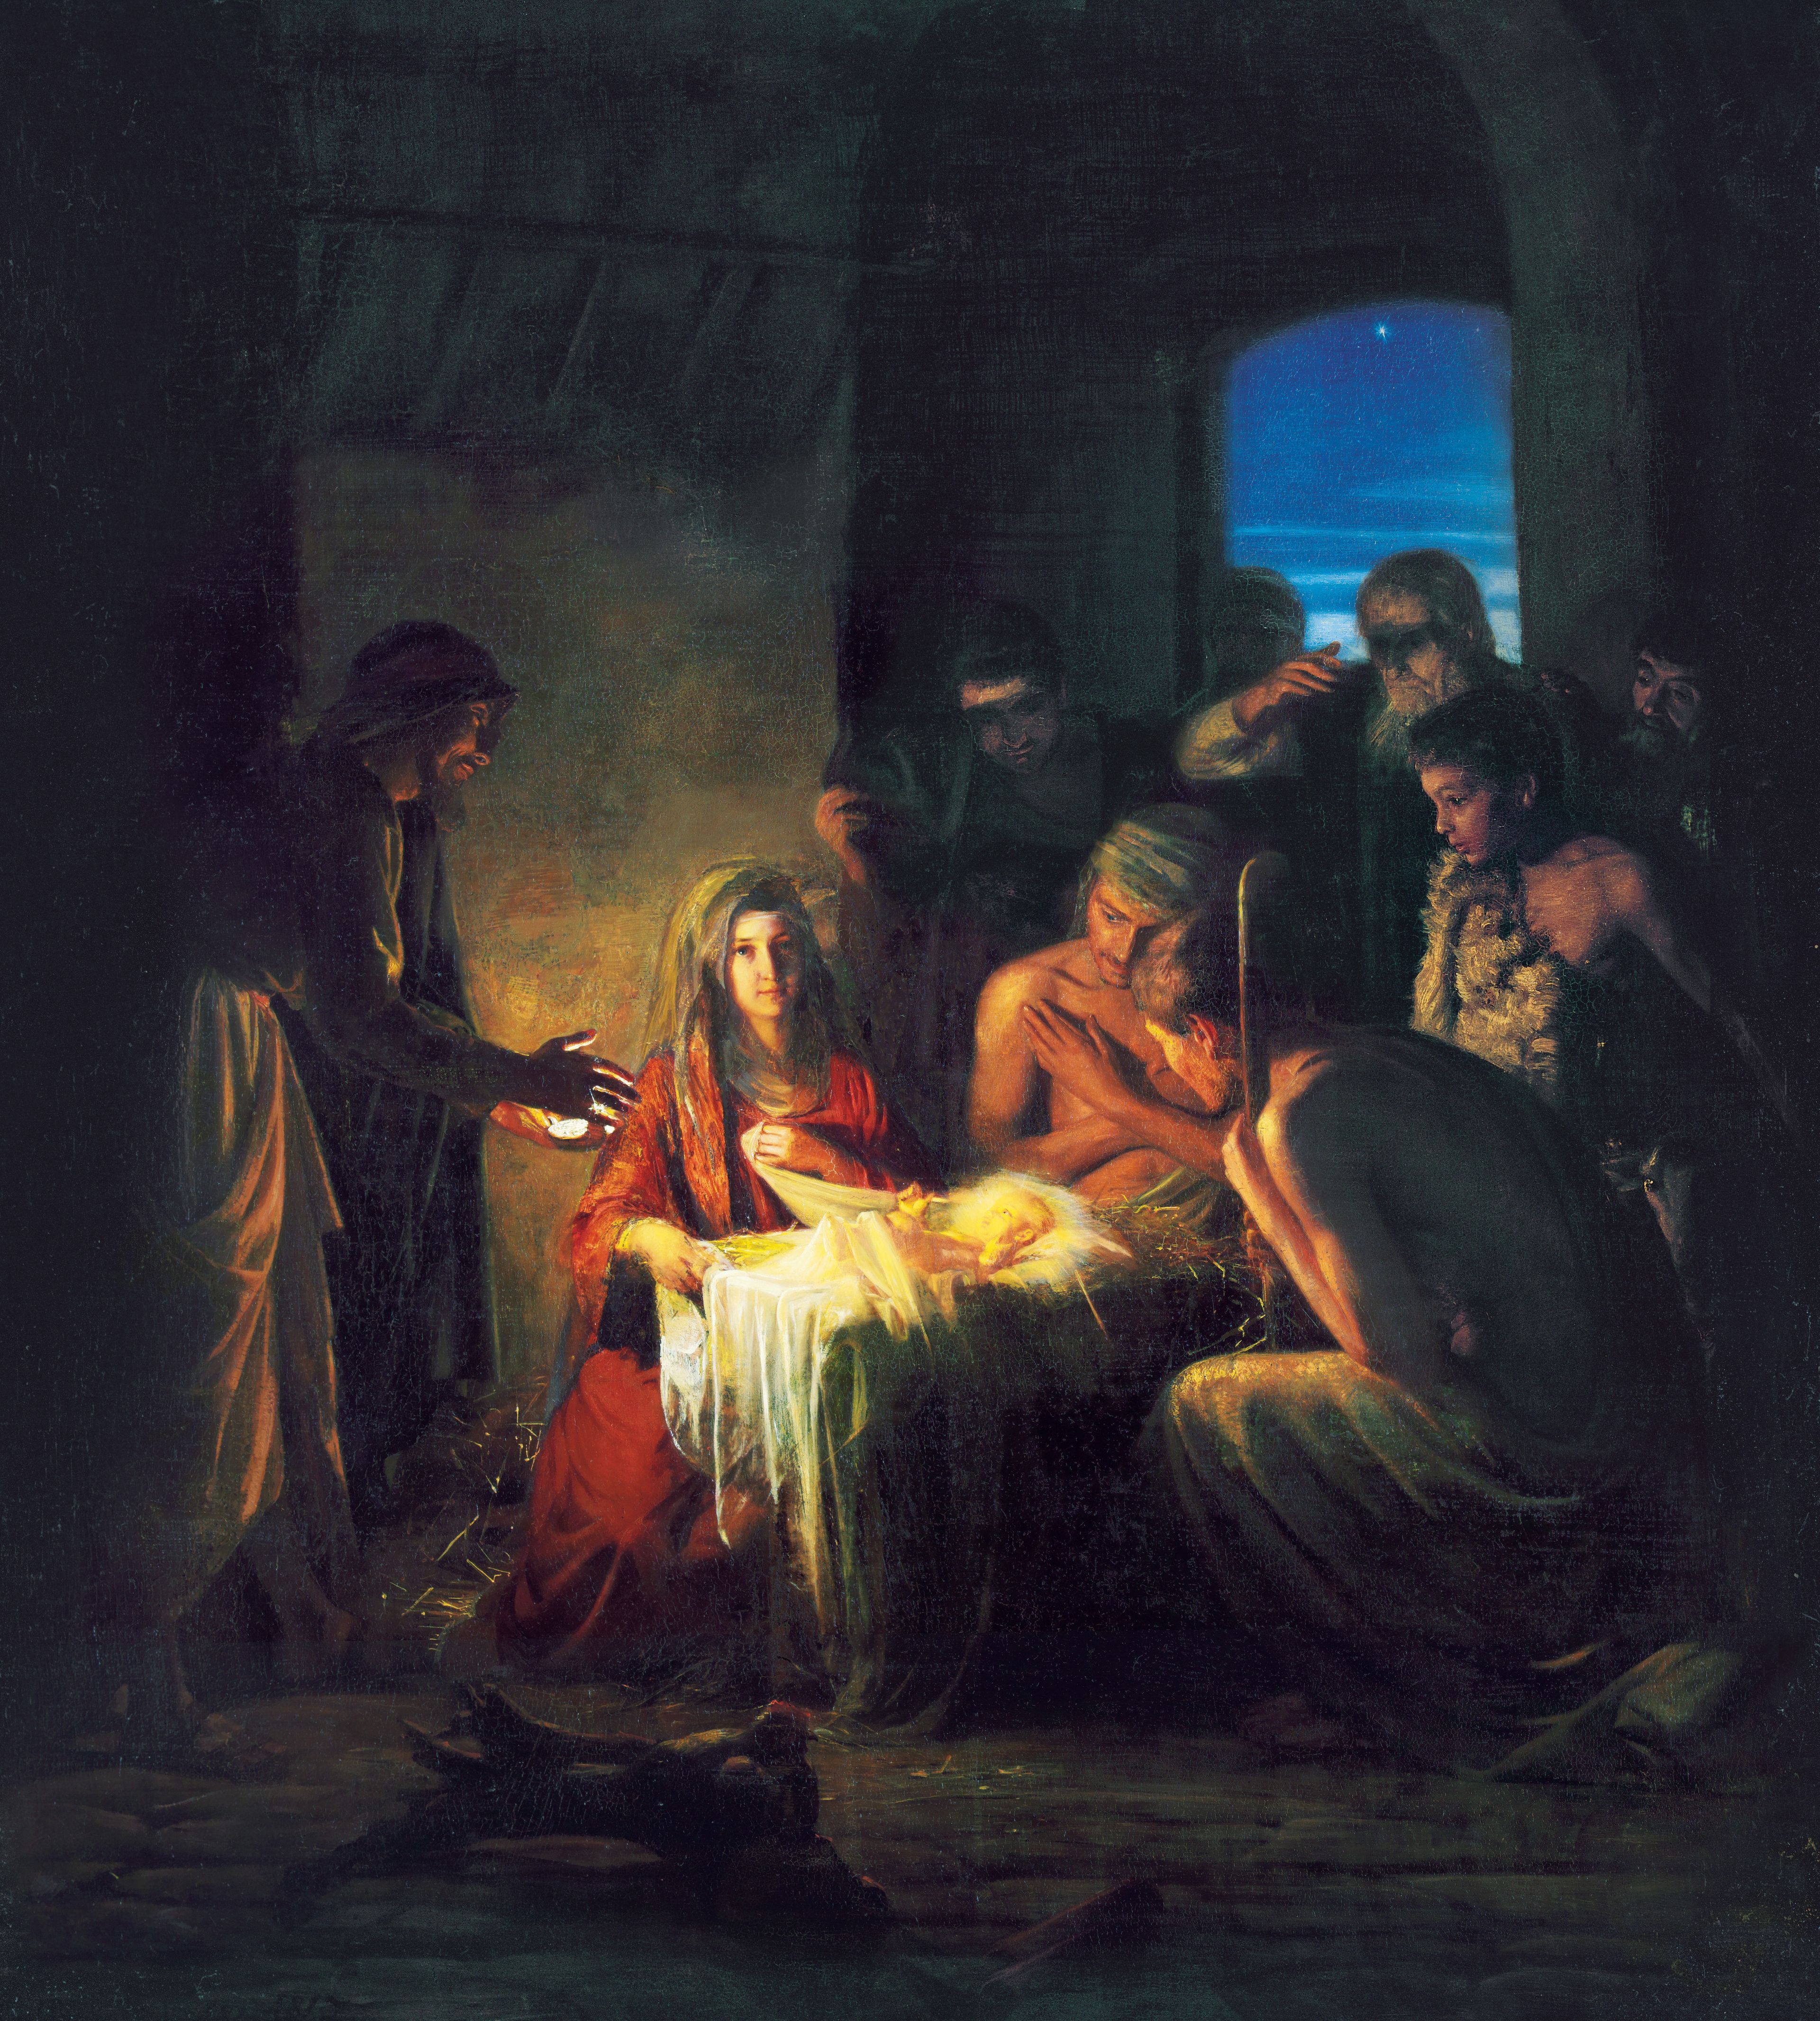 The Birth of Jesus, by Carl Heinrich Bloch (62116); GAK 200; GAB 30; Primary manual 1-75; Primary manual 2-41; Primary manual 4-10; Primary manual 6-50; Primary manual 7-03; Isaiah 7:14; Luke 2:1–16; 1 Nephi 11:13–21; Alma 7:10
This image is to be used for Church purposes only.